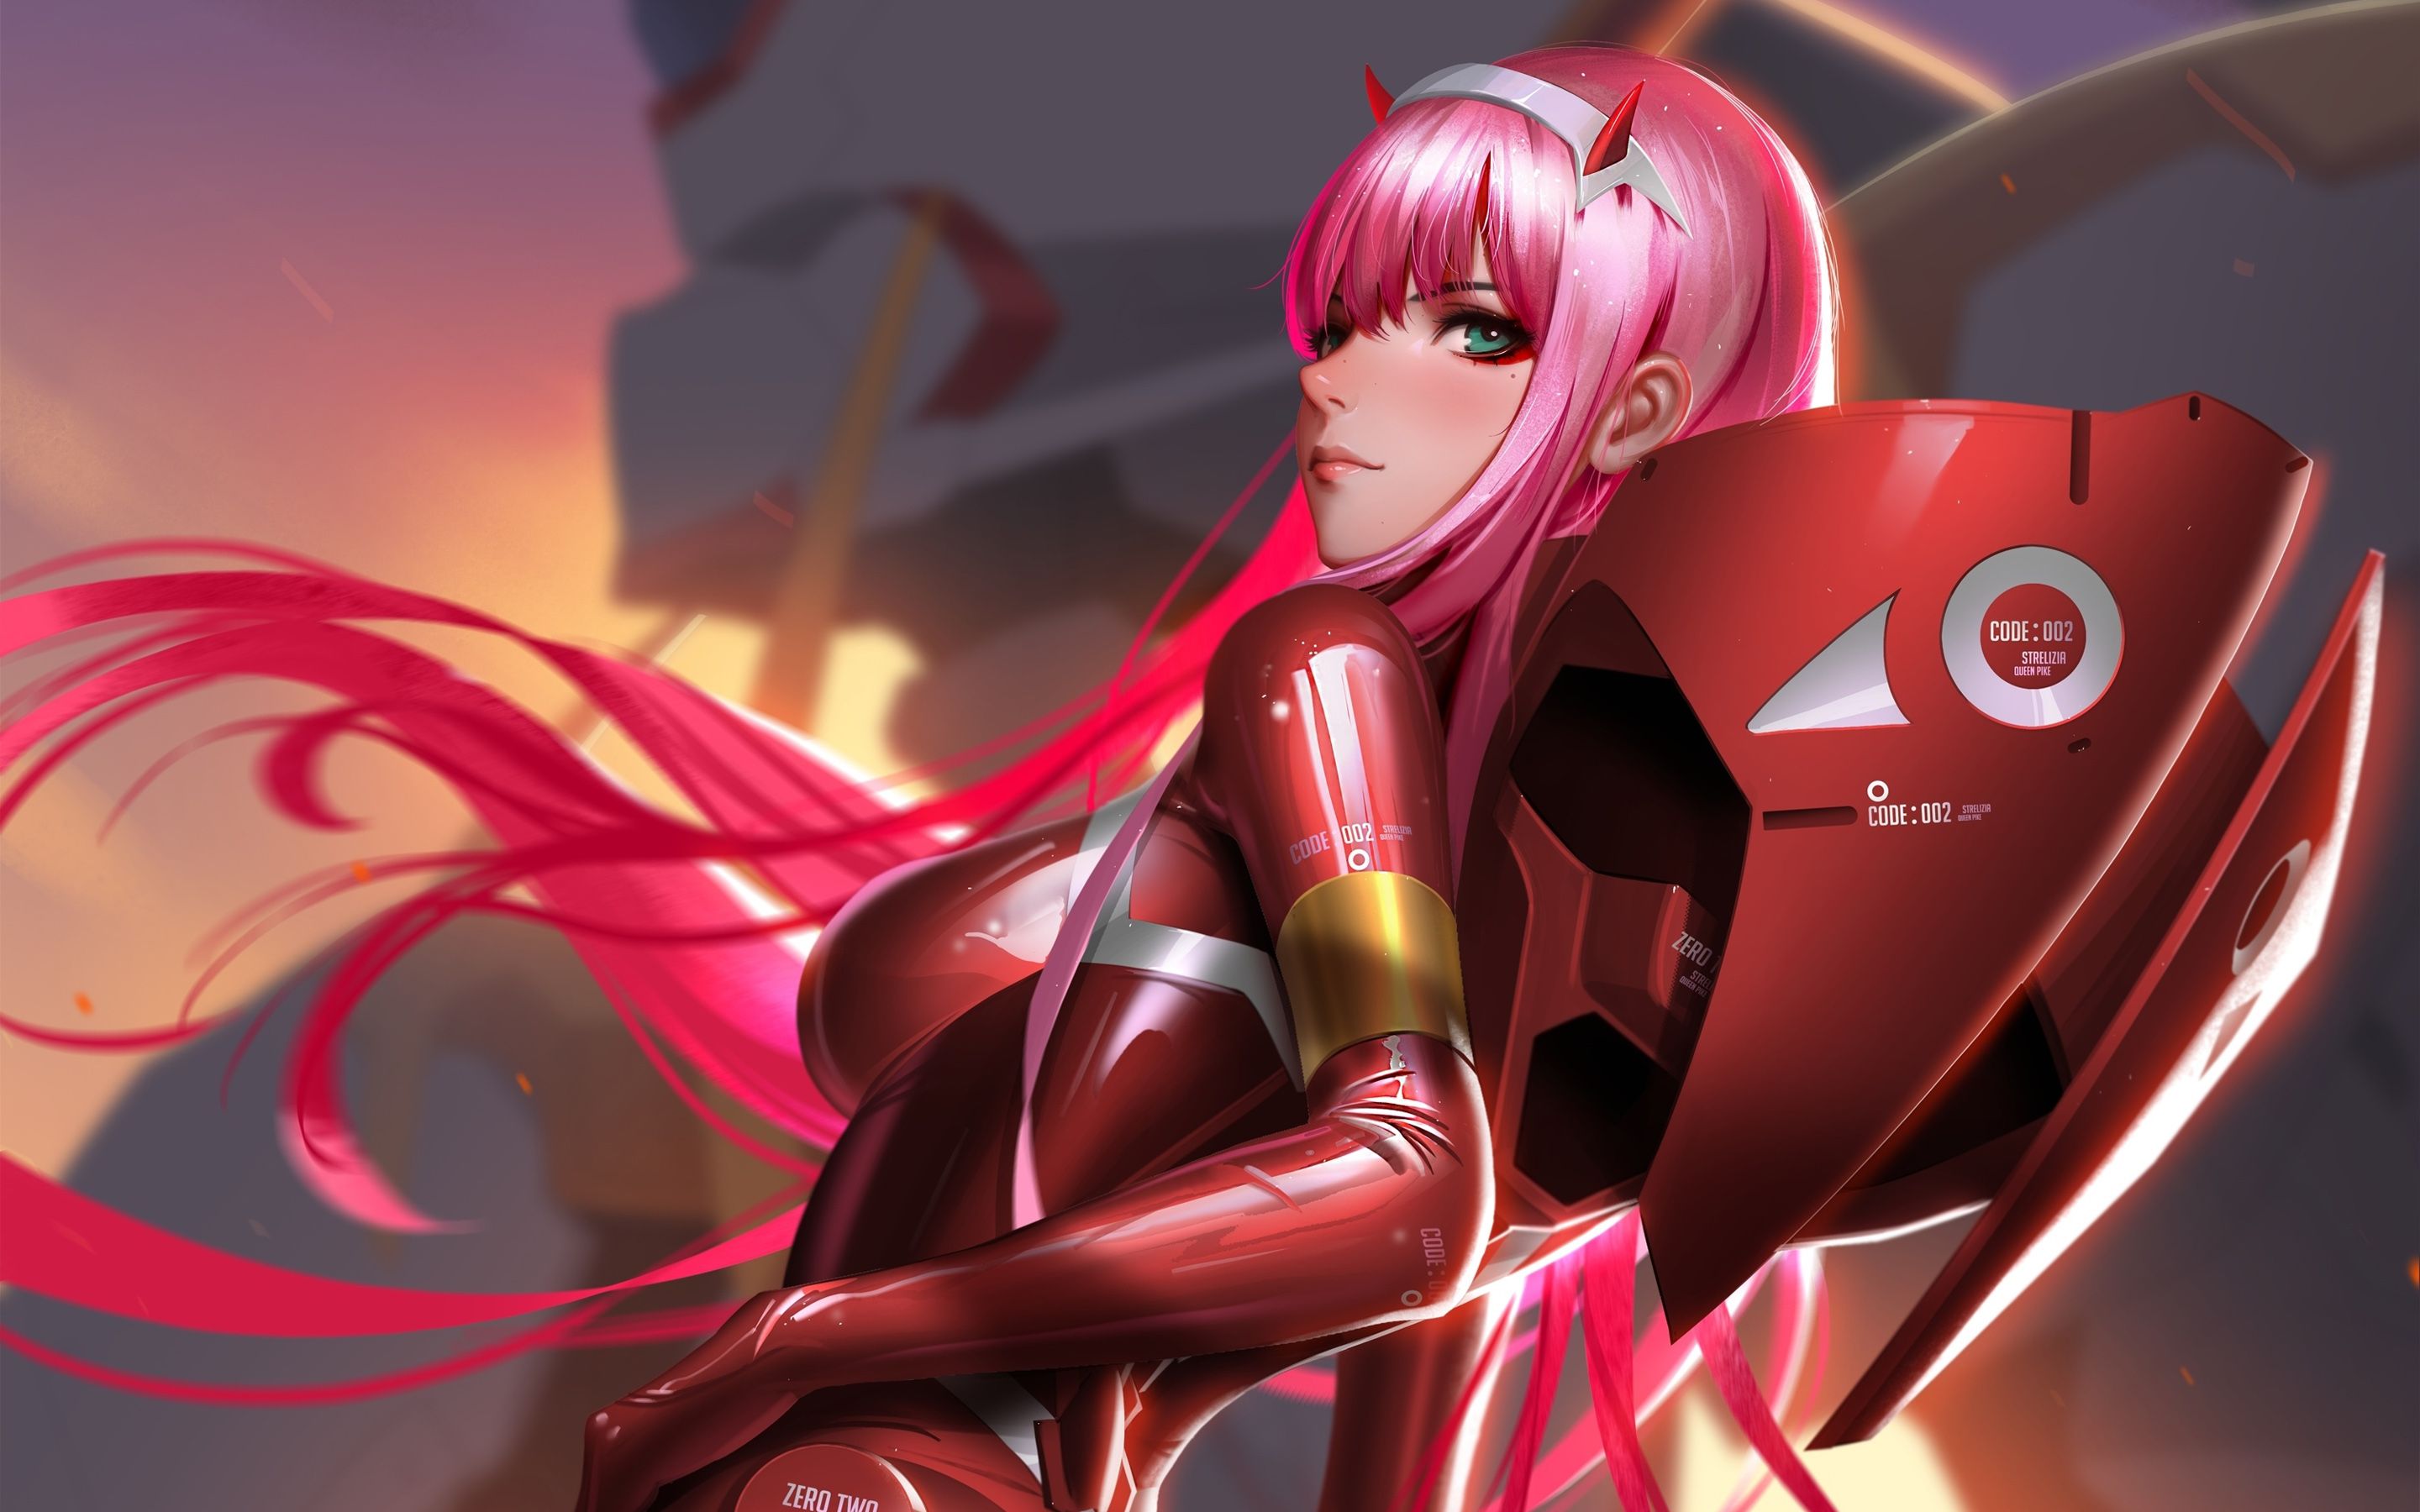 Download wallpaper Zero Two, 3D art, pink hair, manga, DARLING in the FRANXX for desktop with resolution 2880x1800. High Quality HD picture wallpaper